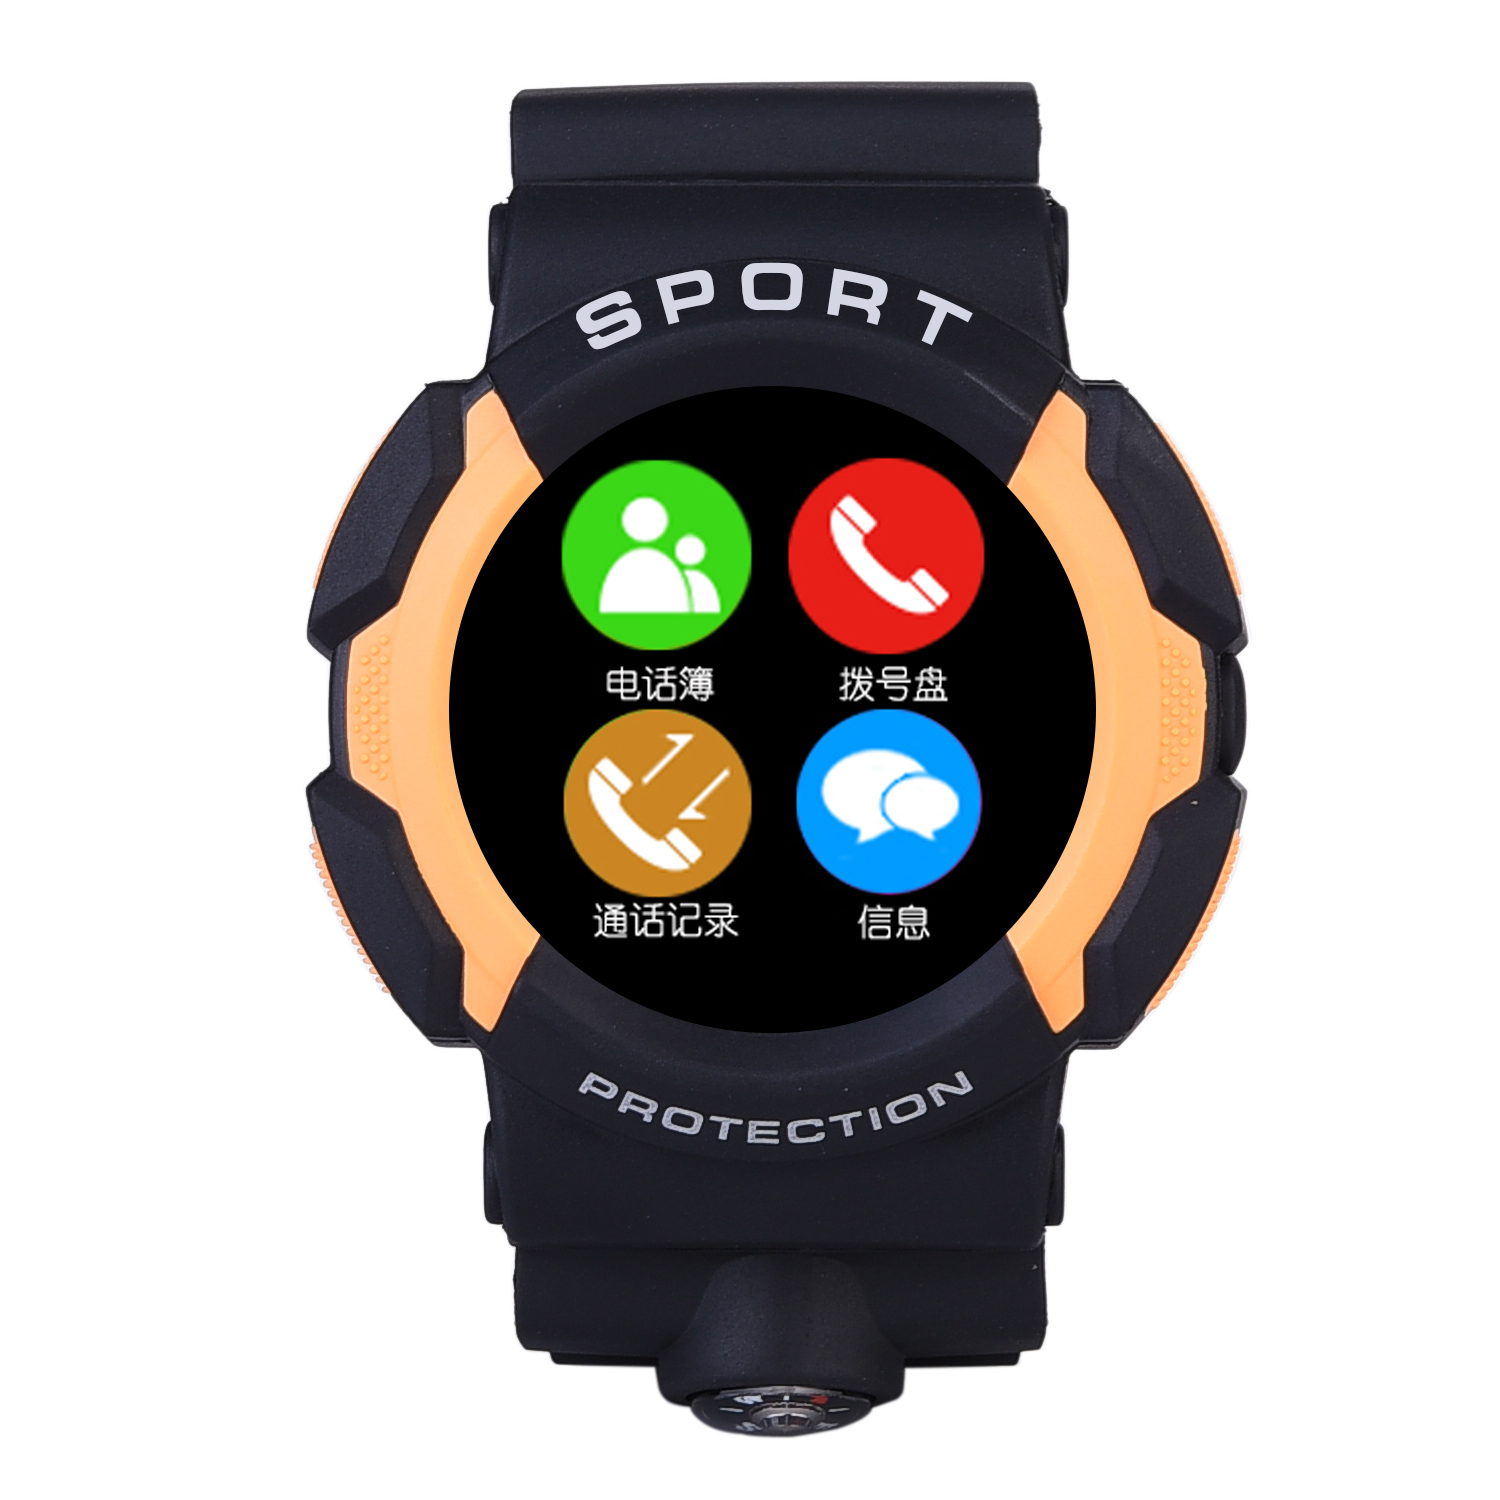 A10-Waterproof-Sport-Smart-Watch-MT2502-With-bluetooth-G-sensor-For-Android-iOS-Phone-1032194-3